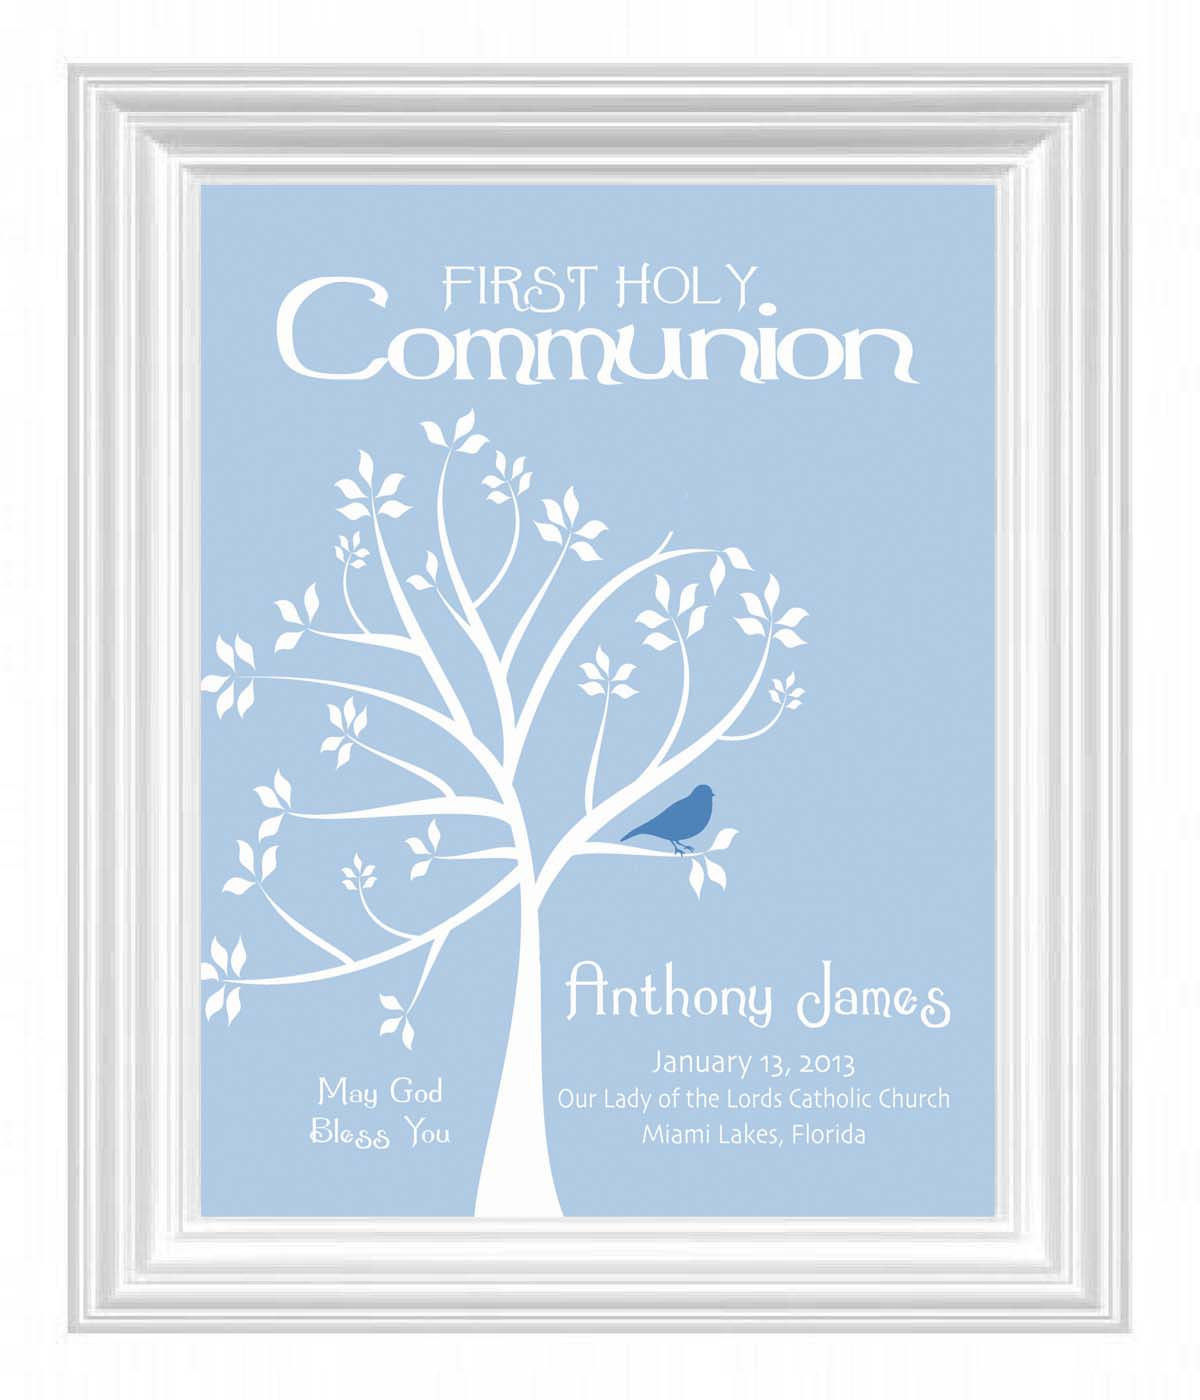 First Communion Gift Ideas Boys
 munion Personalized Gift First Holy munion Print Boys